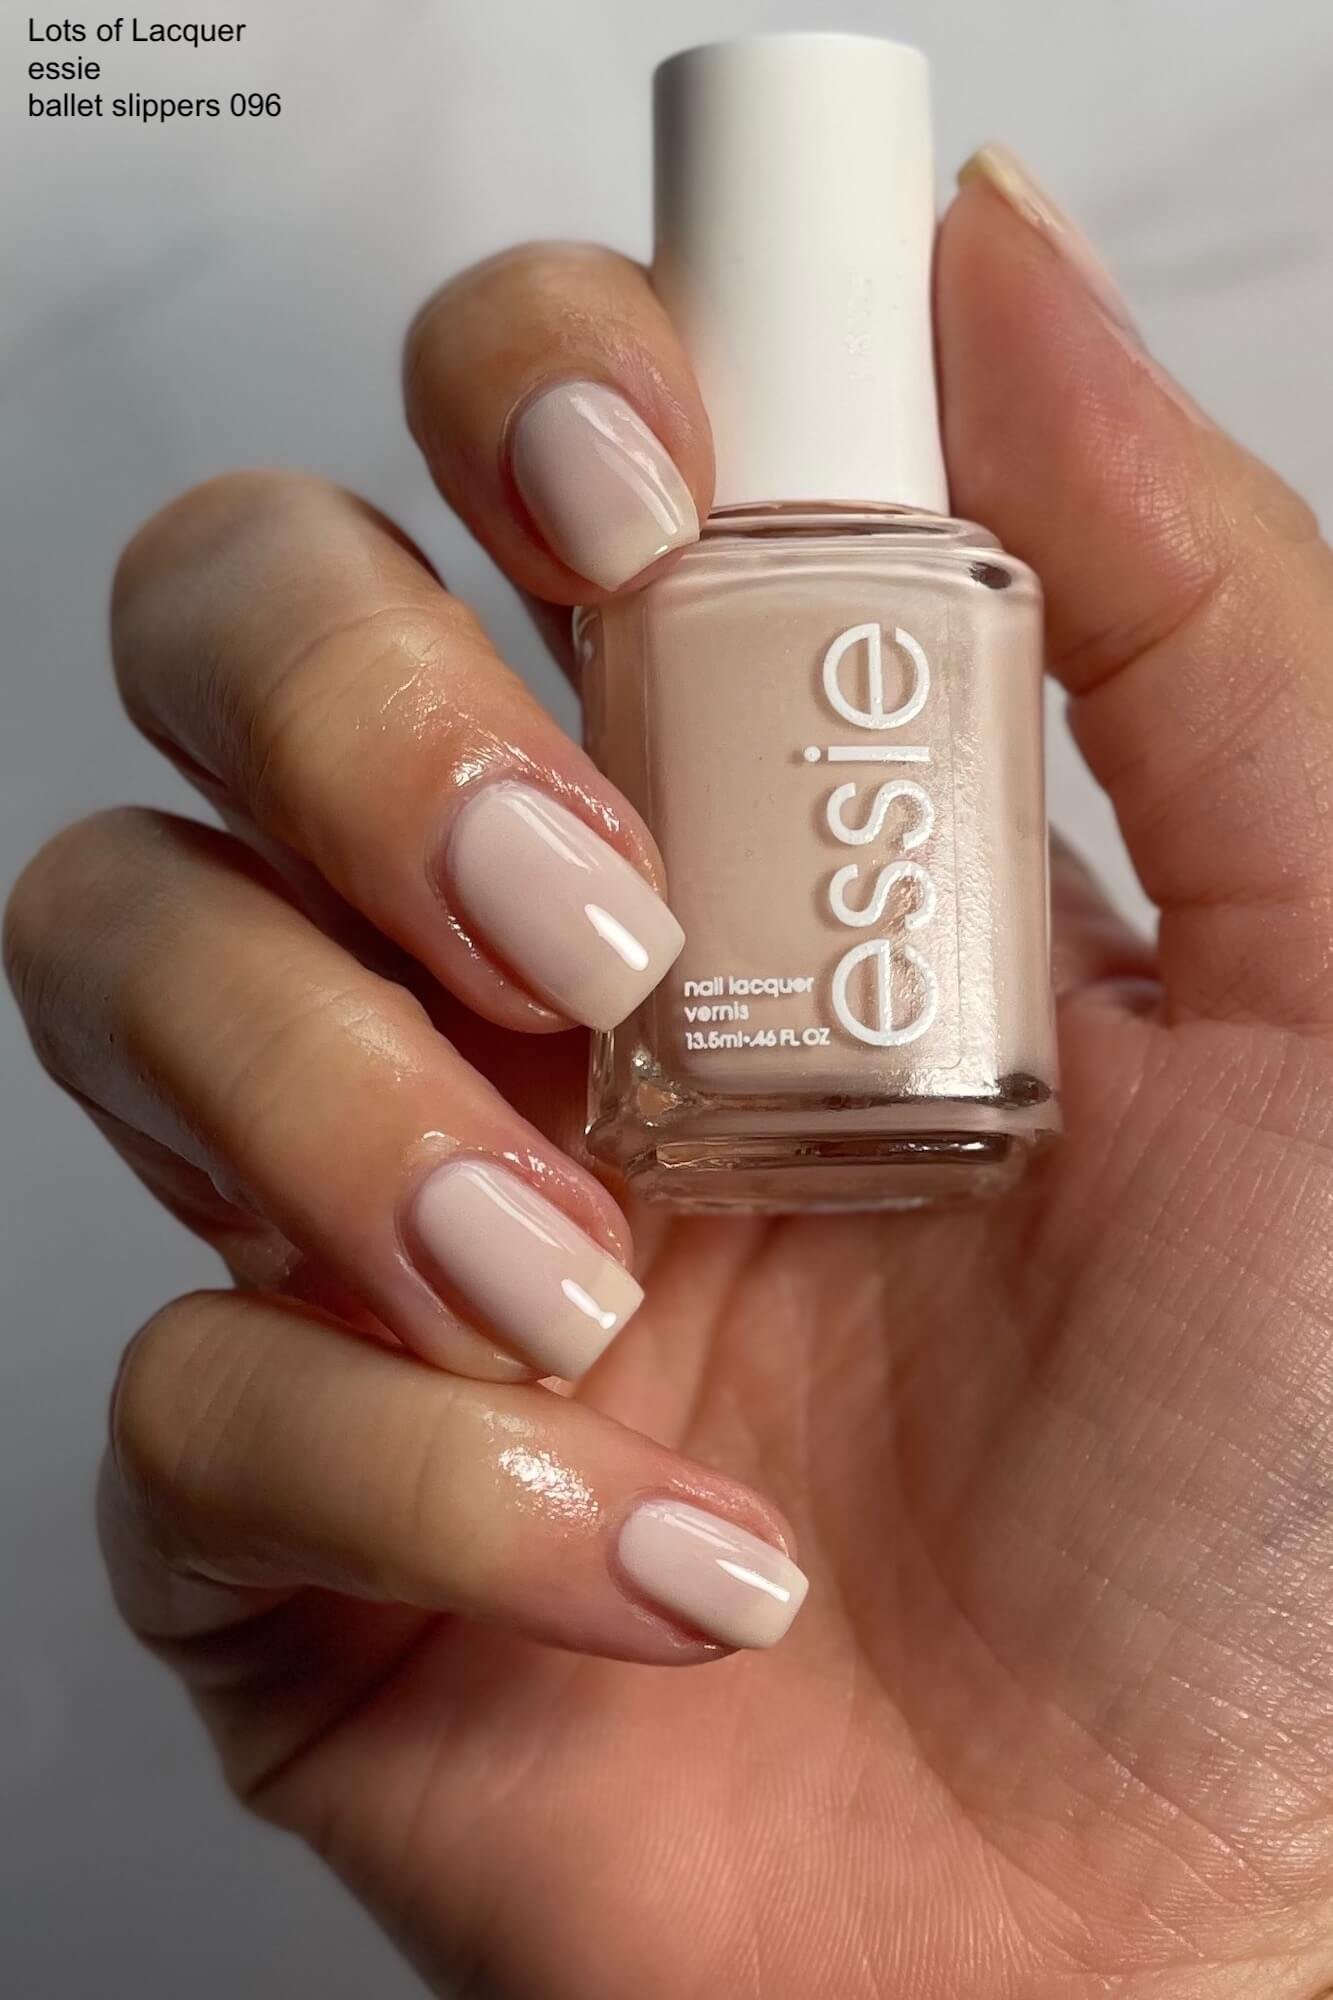 Meet Essie's Ballet Slippers, The Queen's favourite nail polish